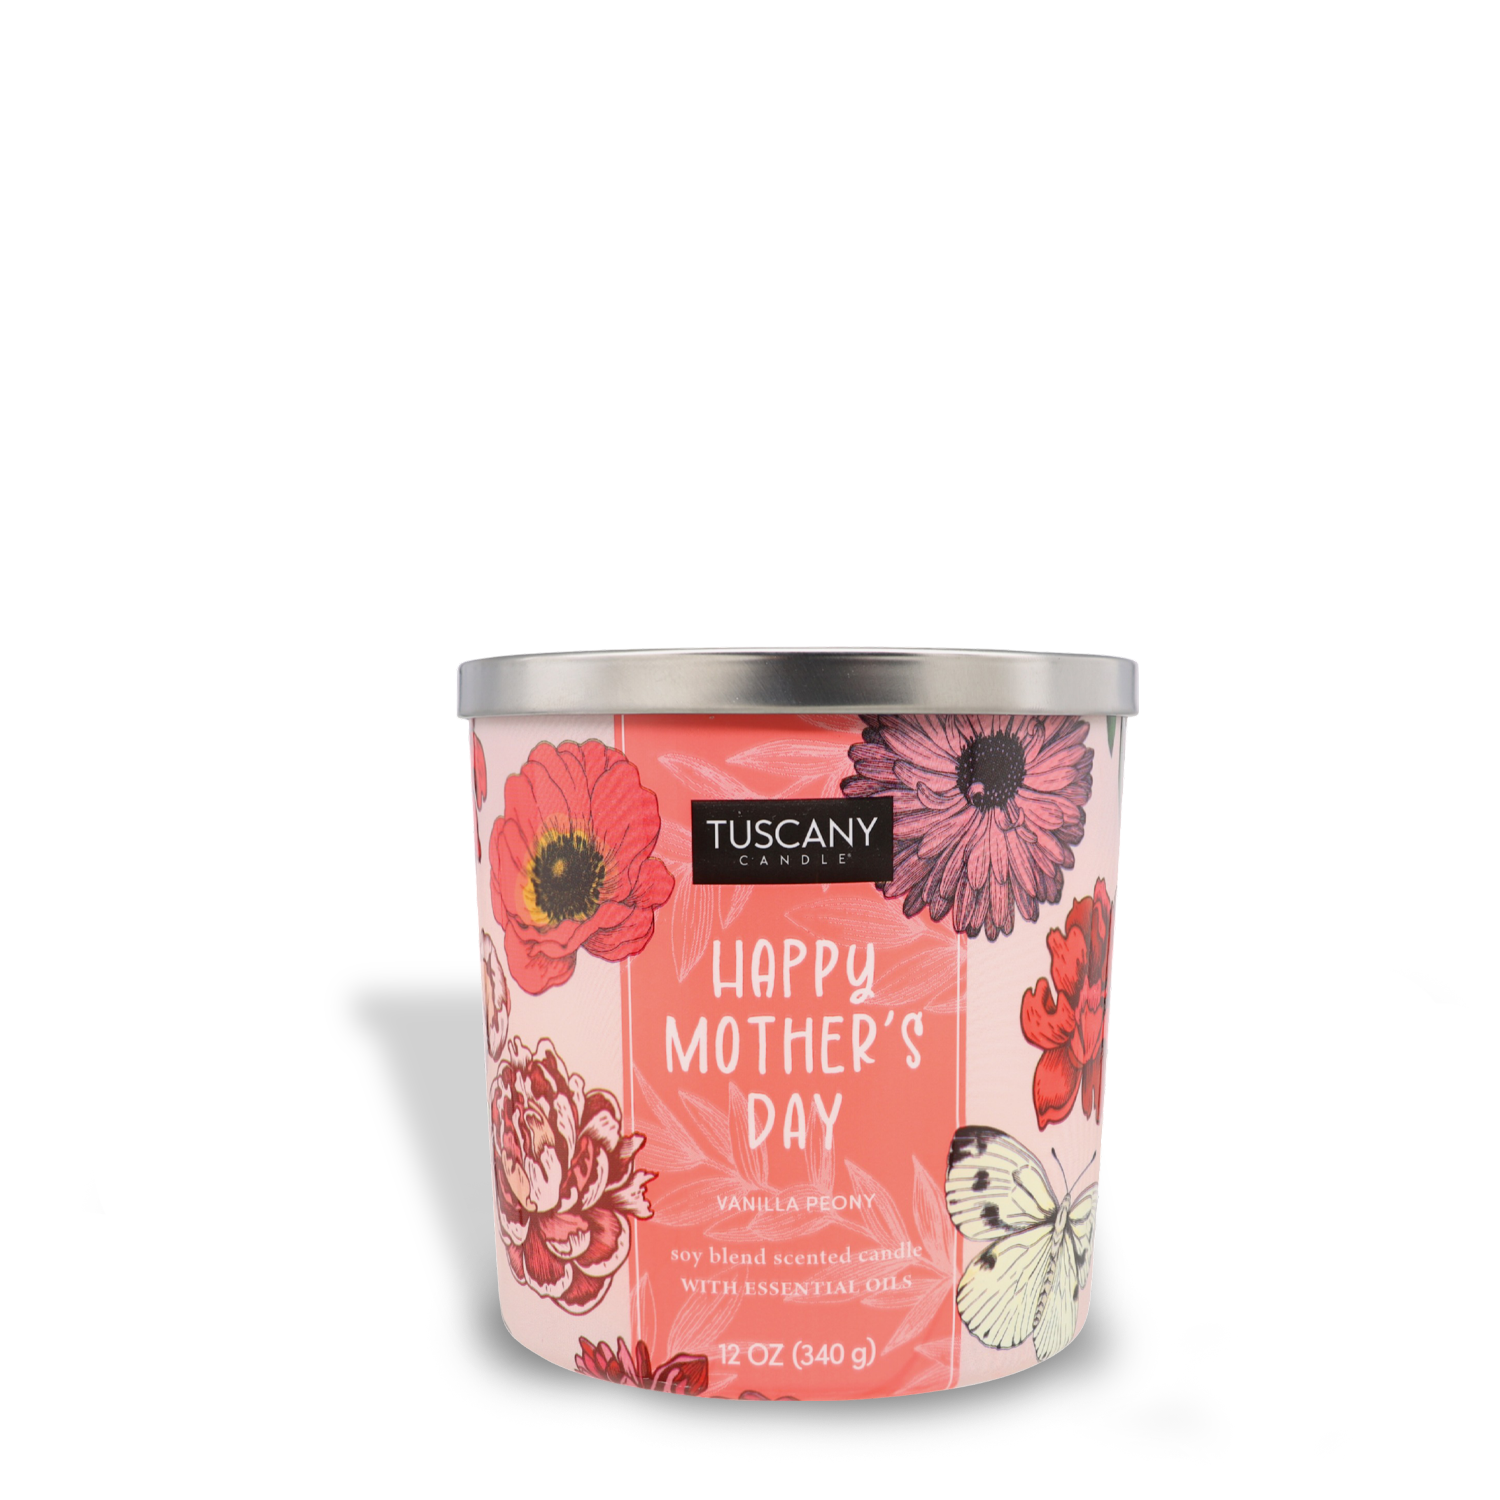 A candle labeled "Happy Mother's Day (12 oz) – Mother's Day Collection" with floral designs on the container, featuring a vanilla peony scent by Tuscany Candle® SEASONAL.